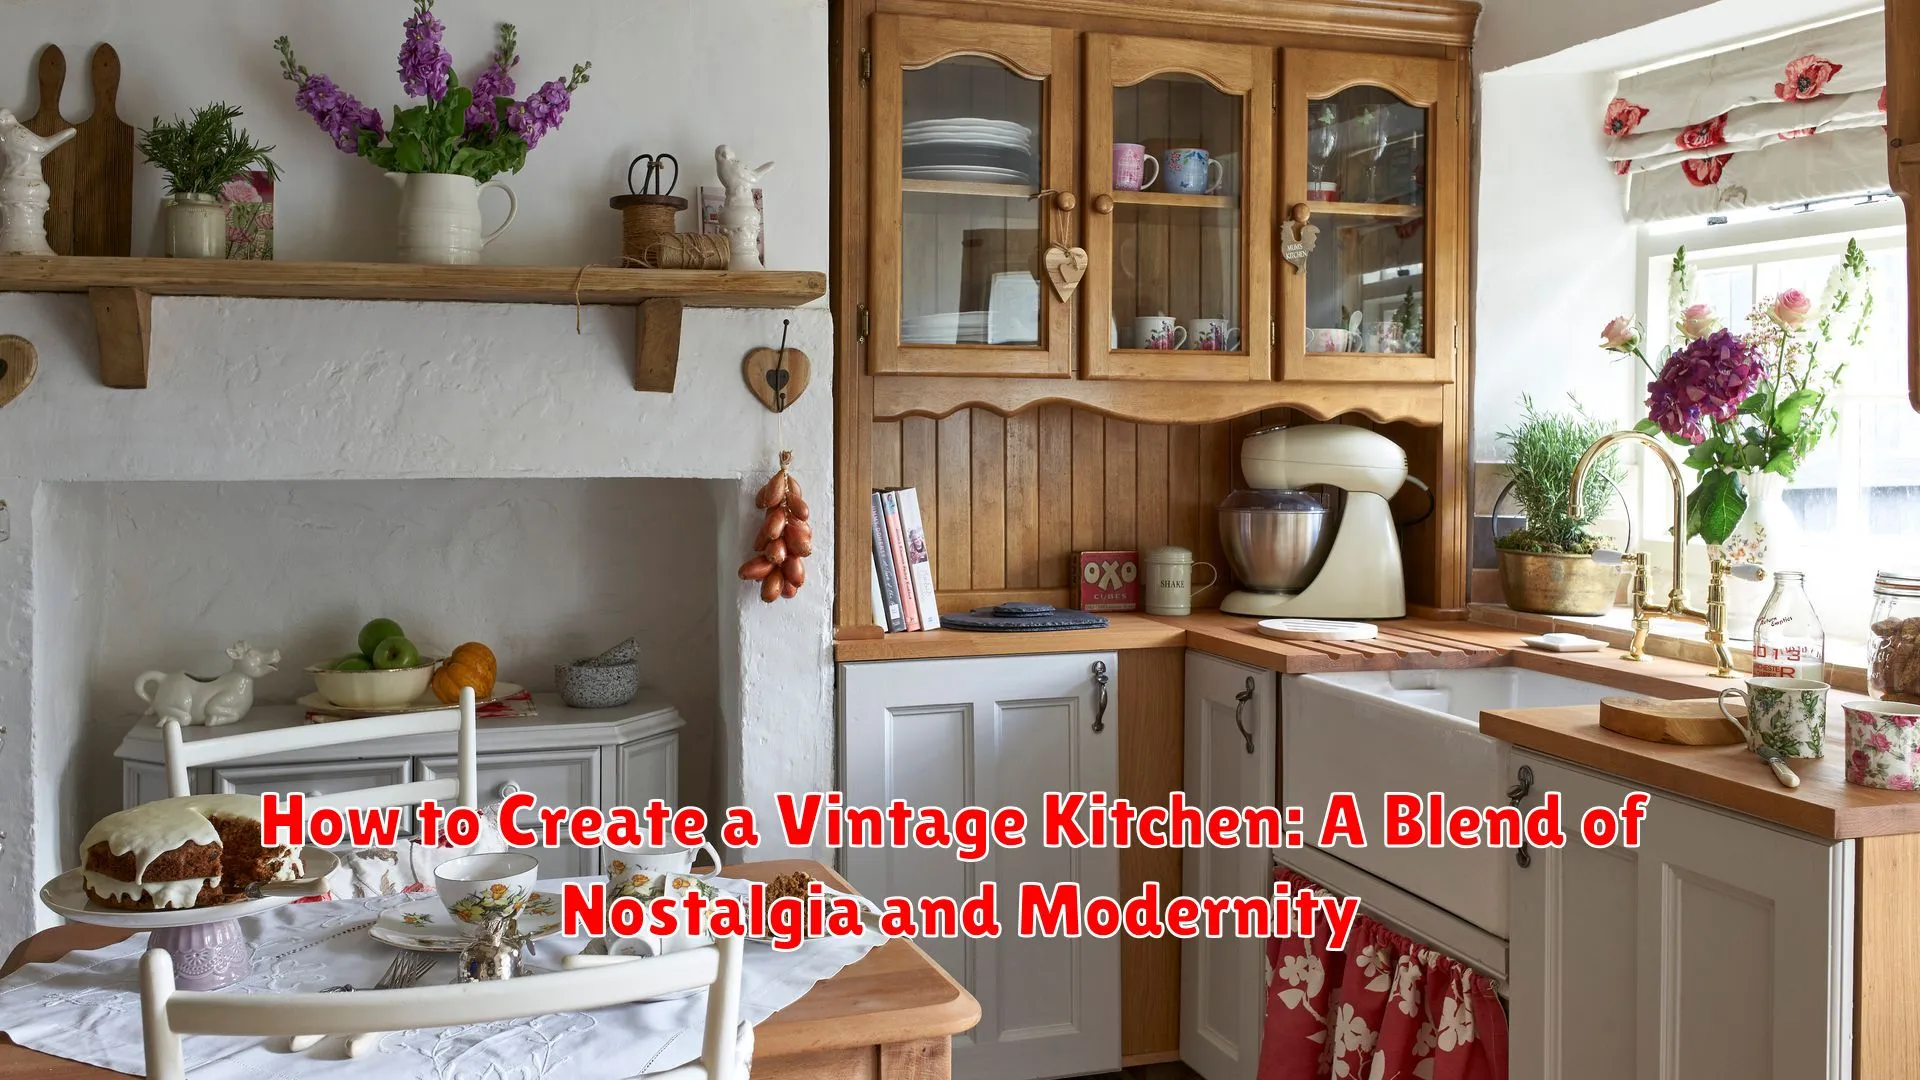 How to Create a Vintage Kitchen: A Blend of Nostalgia and Modernity